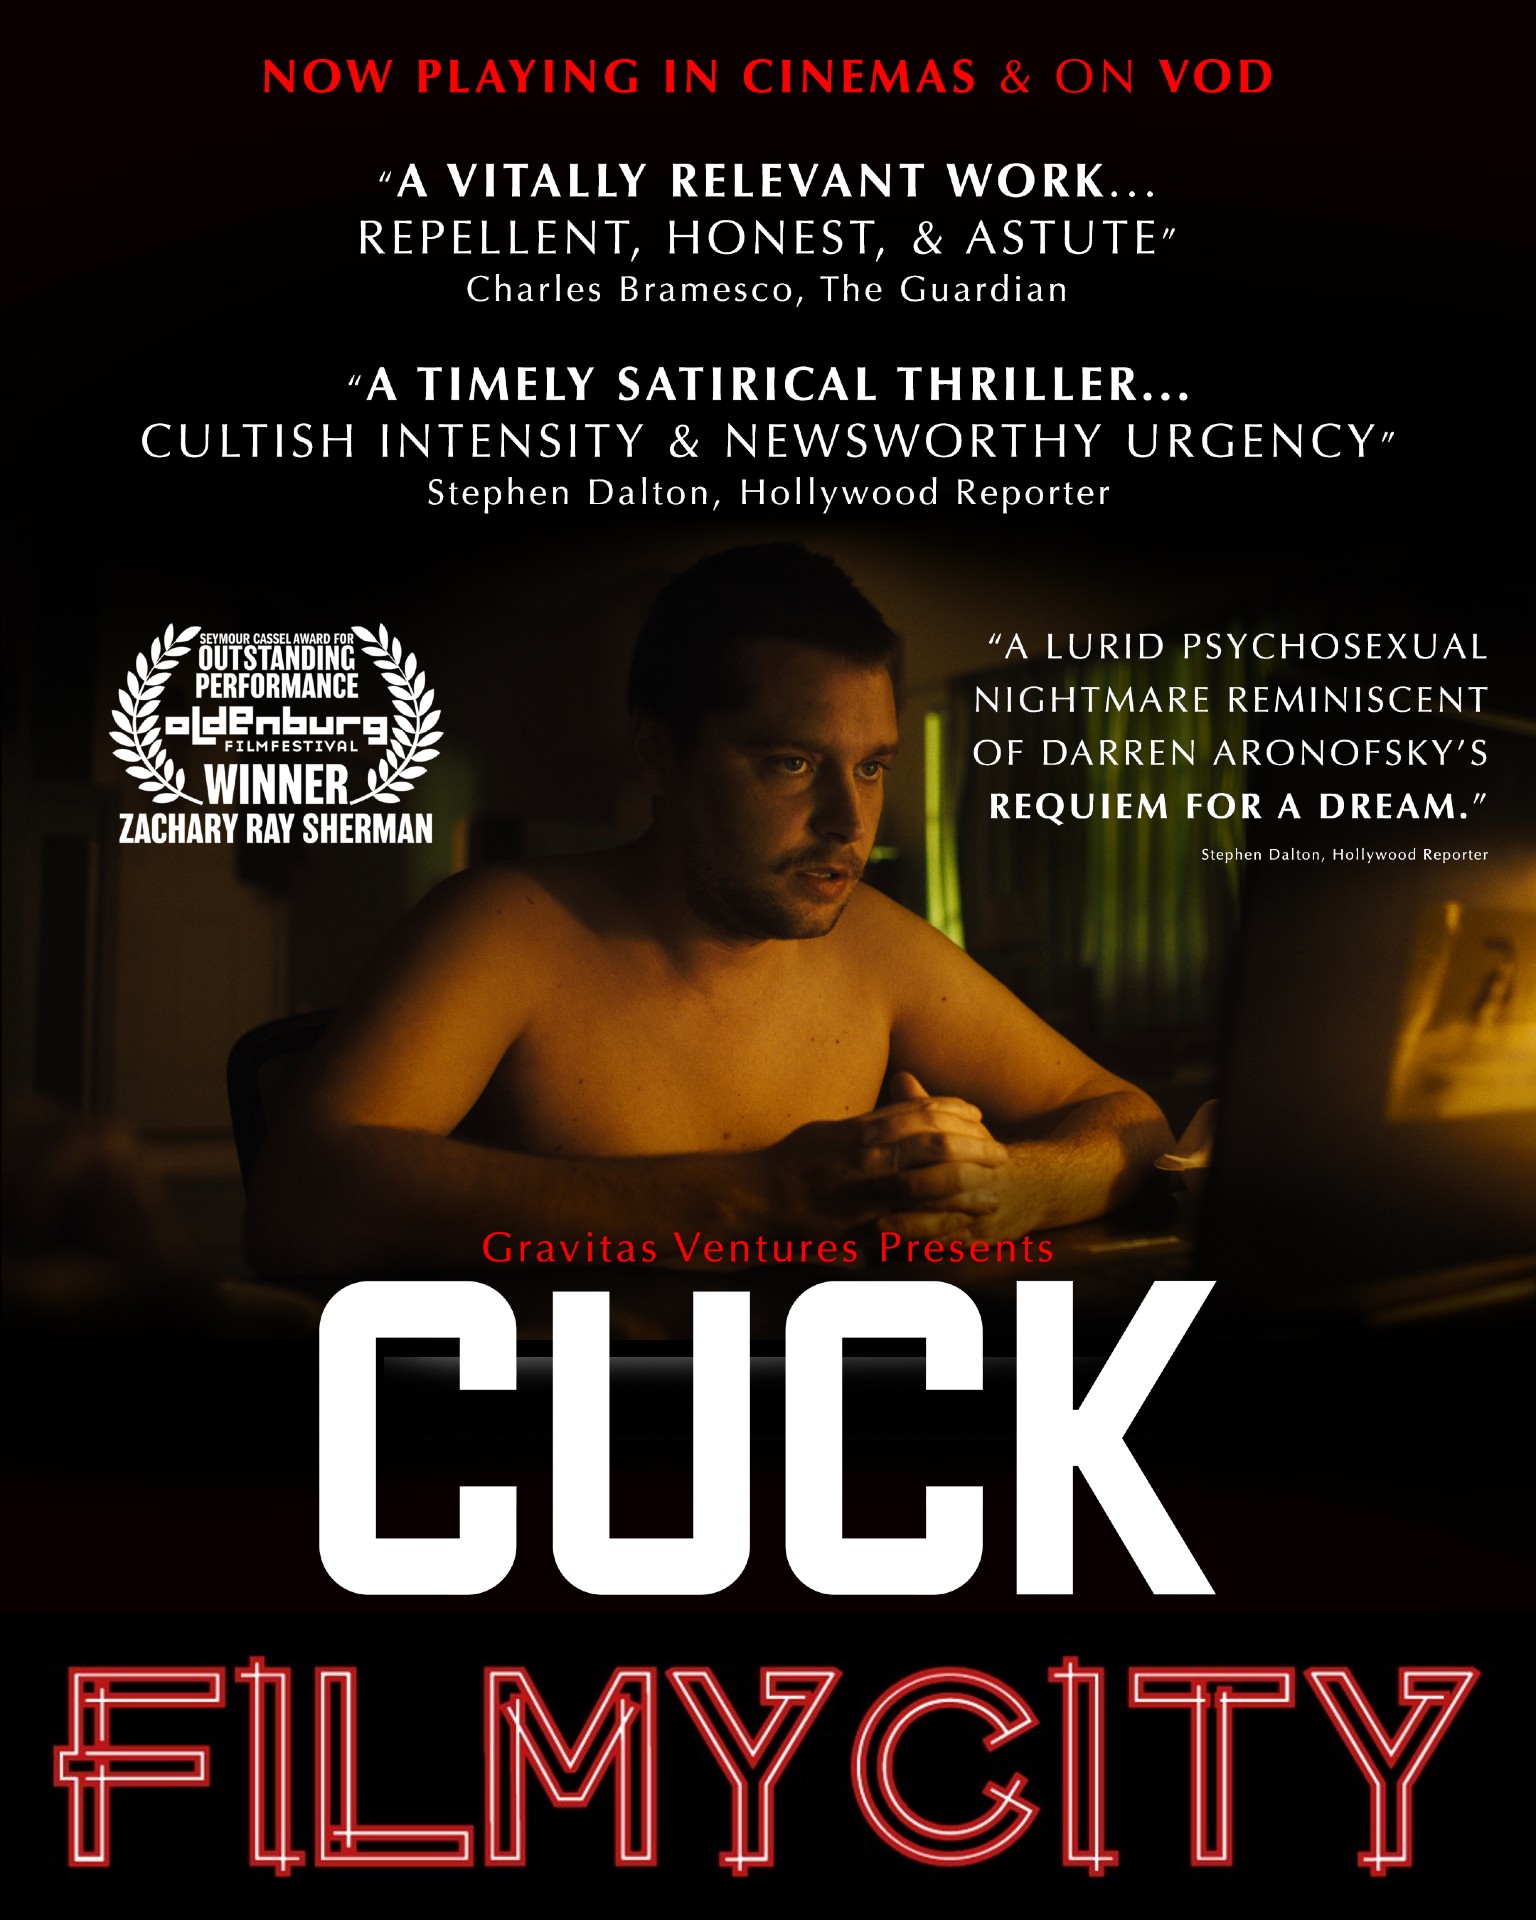 Download Cuck 2019 BluRay UNRATED Dual Audio Hindi ORG 1080p | 720p | 480p [500MB] download